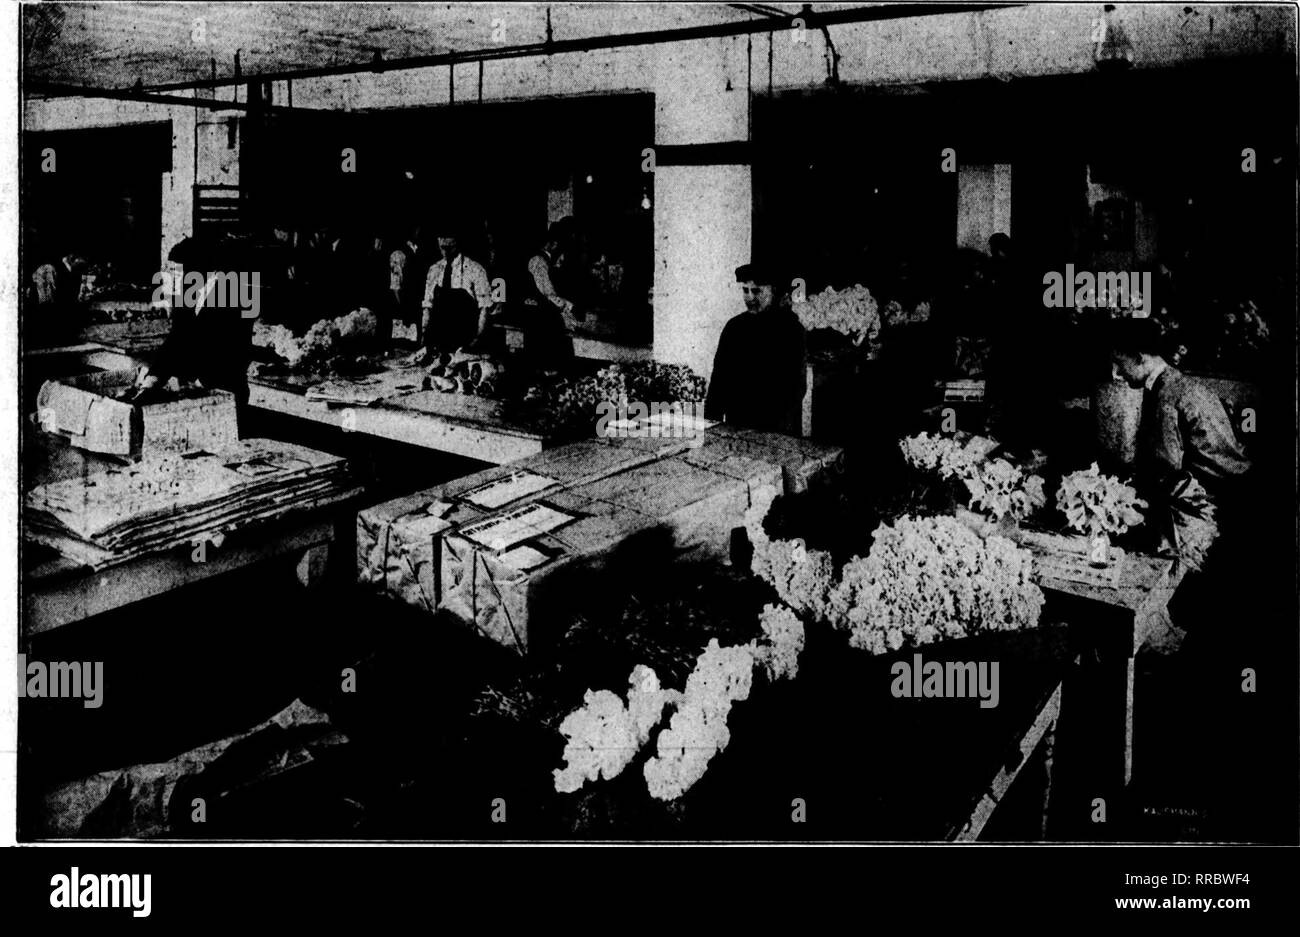 . Florists' review [microform]. Floriculture. r WH9LESALE GD9WEDS ^^ CUT fL^WEPS''-PLANTS (!? 182 N. Wabash Ave.,'&quot;'' 'ctr.^S'^^s^r'&quot;''CHICAGO, ILL. |. A View in Our Shippieg Department at Ea(ter. i In addition to a supply of Cut Flowers second to none in America, we have a Splendidly Equipped Shipping Department Our facilities are equal to the prompt and accurate handling of all orders for Mothers' Day, however much the demand exceeds previous records. &quot; SERVICE THAT SATISFIES &quot; For Complete Mothers' Day Price List—Turn bacl&lt; one page m. Please note that these images ar Stock Photo